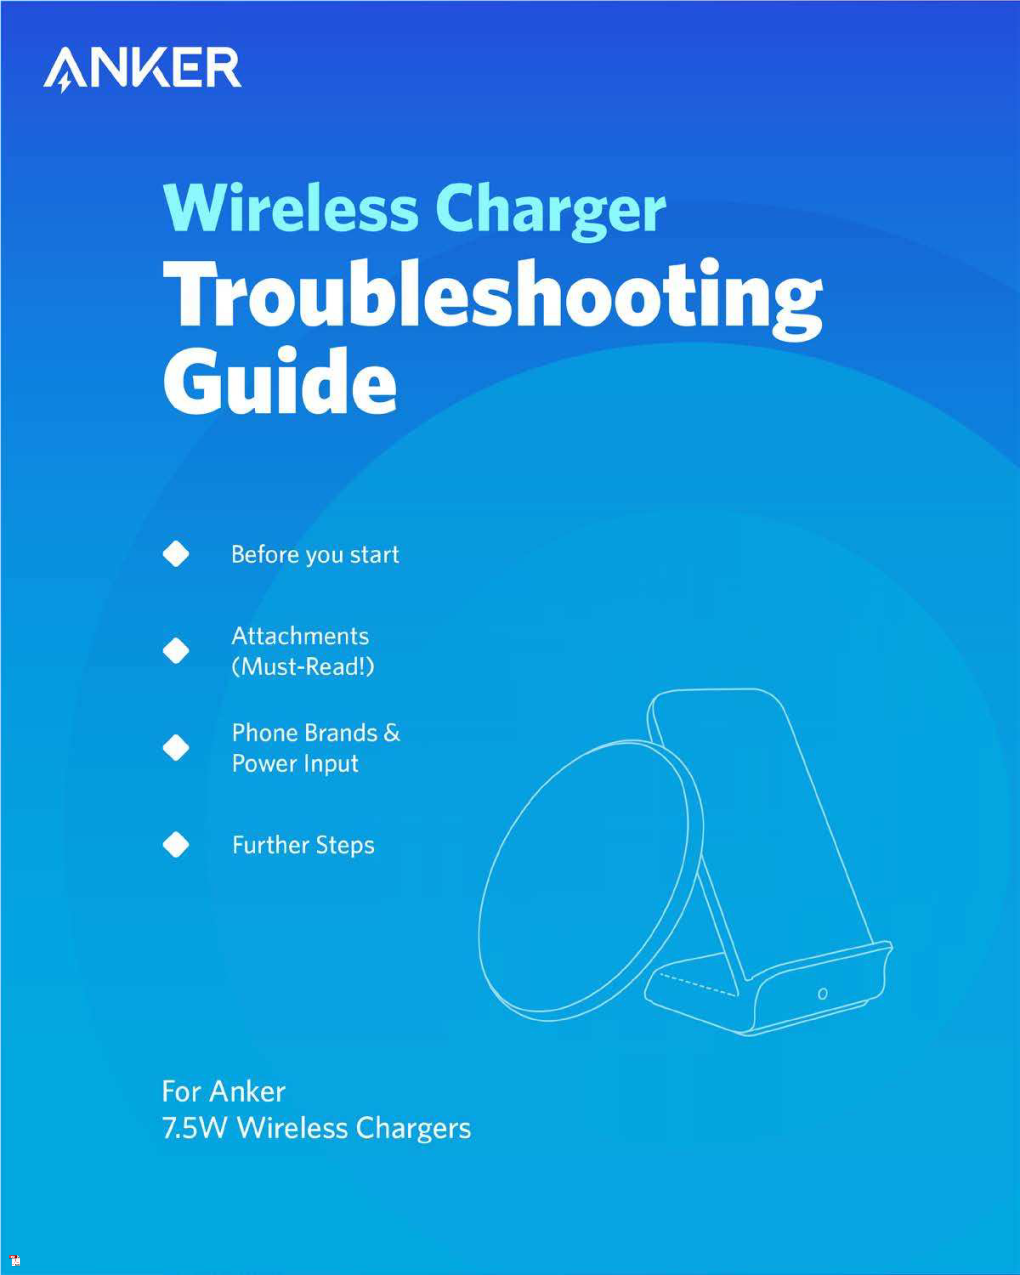 ANKER Wireless Chargers Instructions